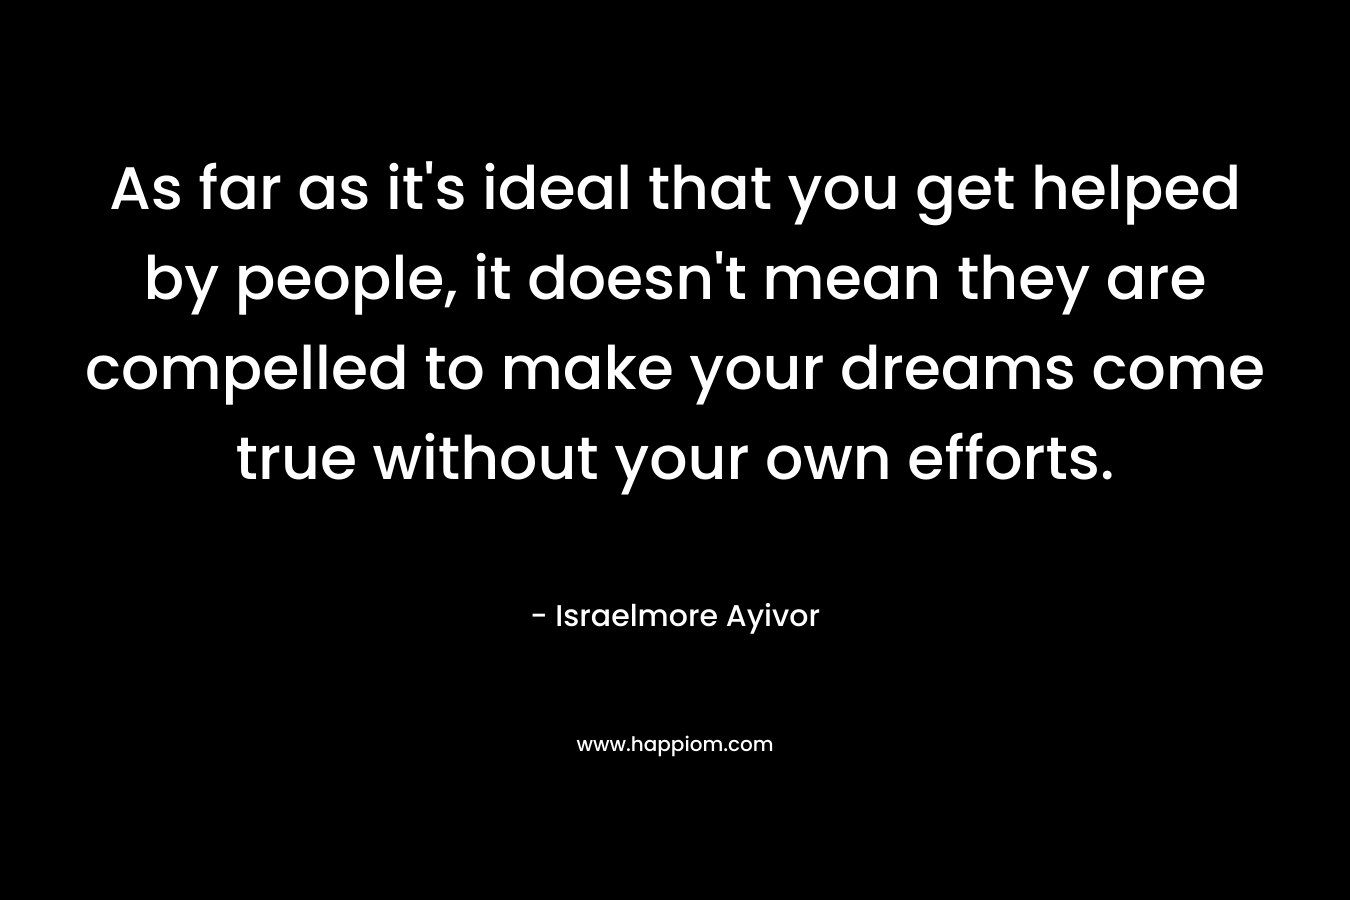 As far as it's ideal that you get helped by people, it doesn't mean they are compelled to make your dreams come true without your own efforts.